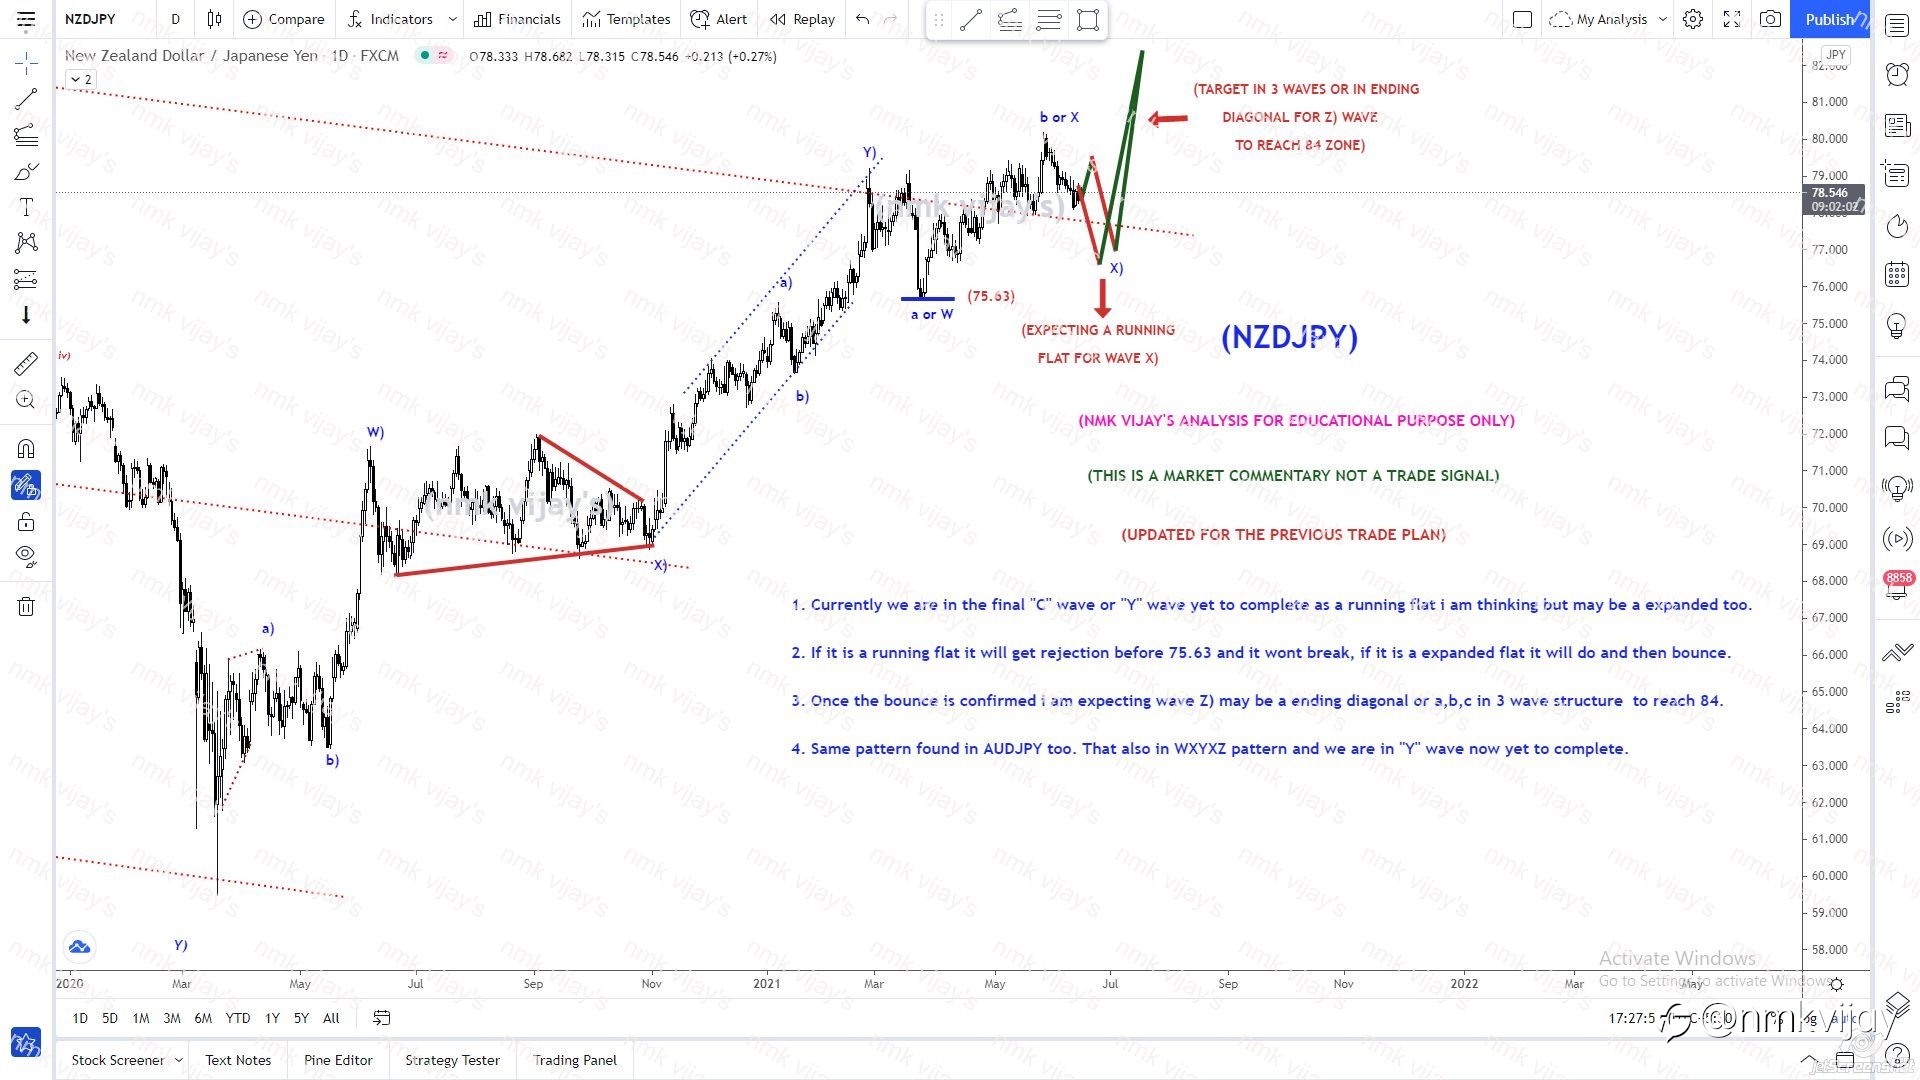 NZDJPY Looking for C or Y to complete for wave X) and then Z) in 3 waves or ending diagonal to reach 84 zone.